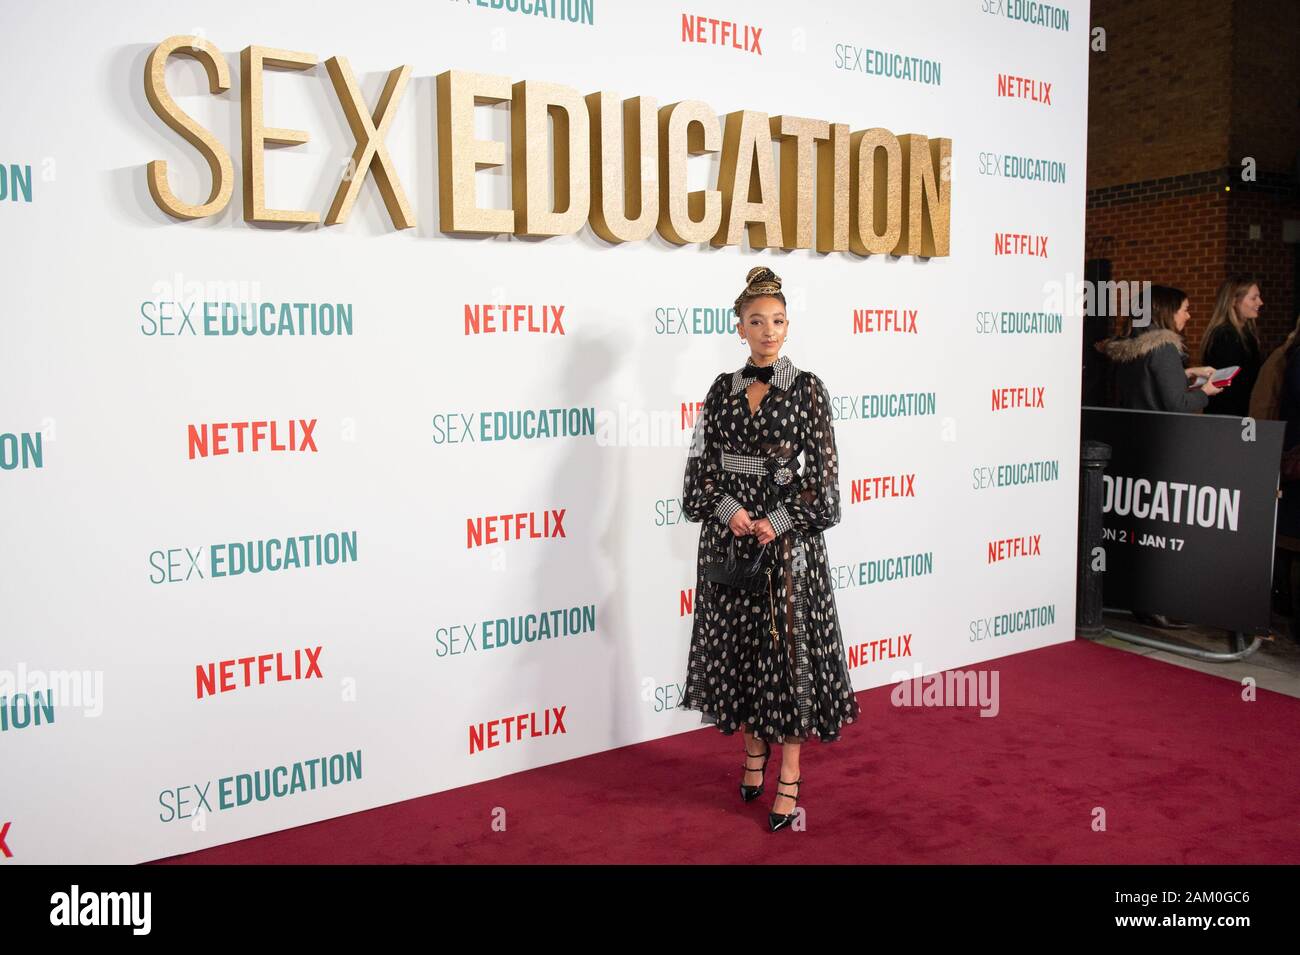 London, United Kingdom. 8 January 2020. Patricia Allison attends the Sex Education Series 2 Premiere held at the Genesis Cinema in Bethnal Green. Credit: Peter Manning/Alamy Live News Stock Photo